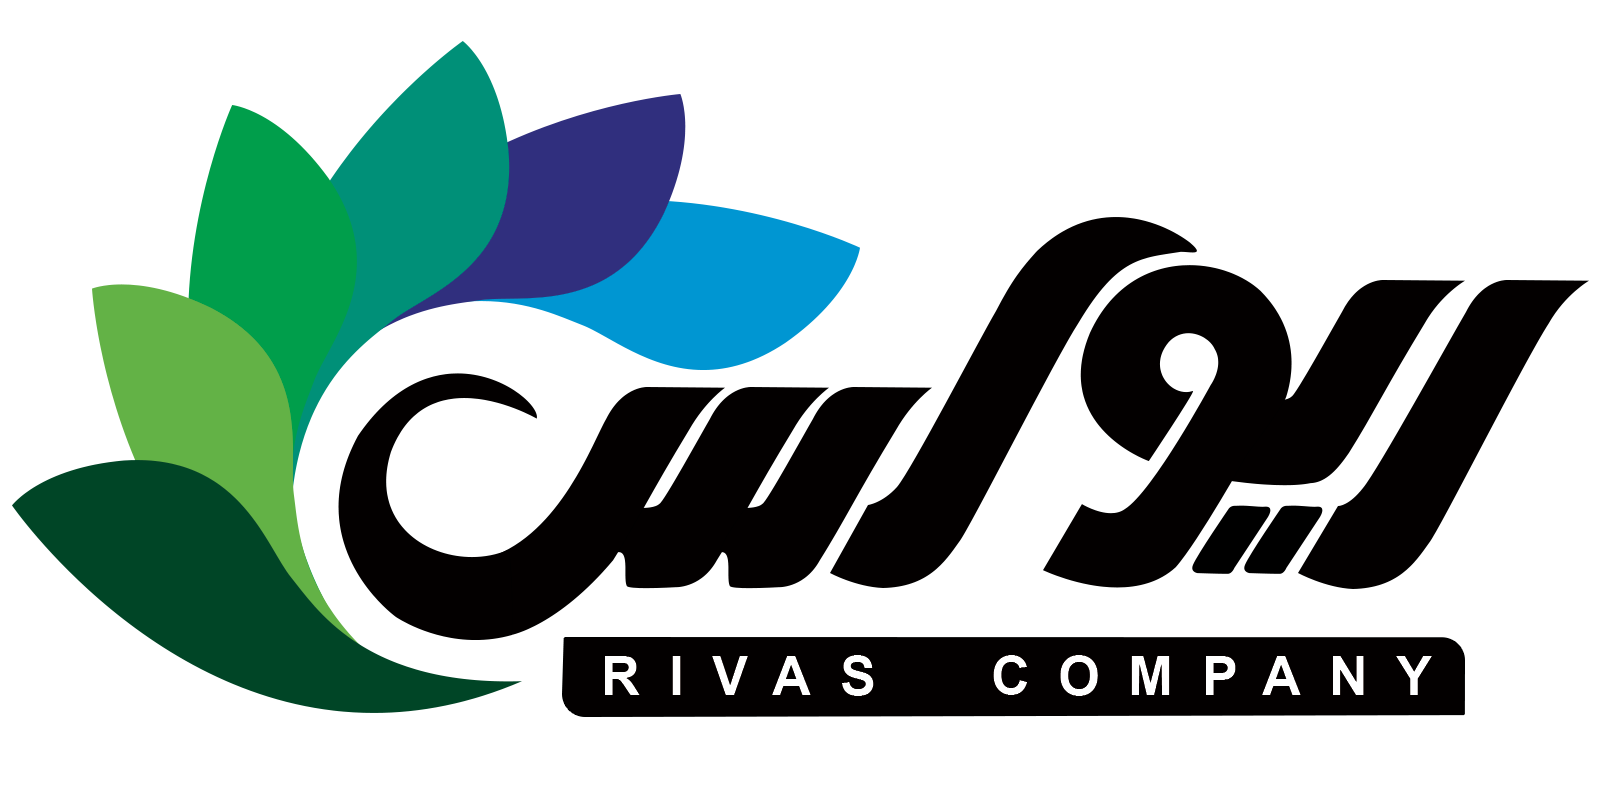  Rivas company, with experienced managements,staffs and also world-class technical knowledge, has been producing flowers , ornamental plants (garden, apparatus) and leaf soil in a specialized manner since 1996. 
Professionally, it has been producing and growing Dutch cut roses since 2001.
According to the strategy of market development and increasing the variety of products, Rivas company has developed a suitable investment program in order to improve the quality and quantity of products.
Currently, Rivas company is active in the production of cut roses with more than 25 varieties of T hybrid roses , 10 varieties of spray roses, eternal roses, leaf soil and technically production of biological predatory insects for greenhouse products in four hectares of modern greenhouses and propagation halls.
 